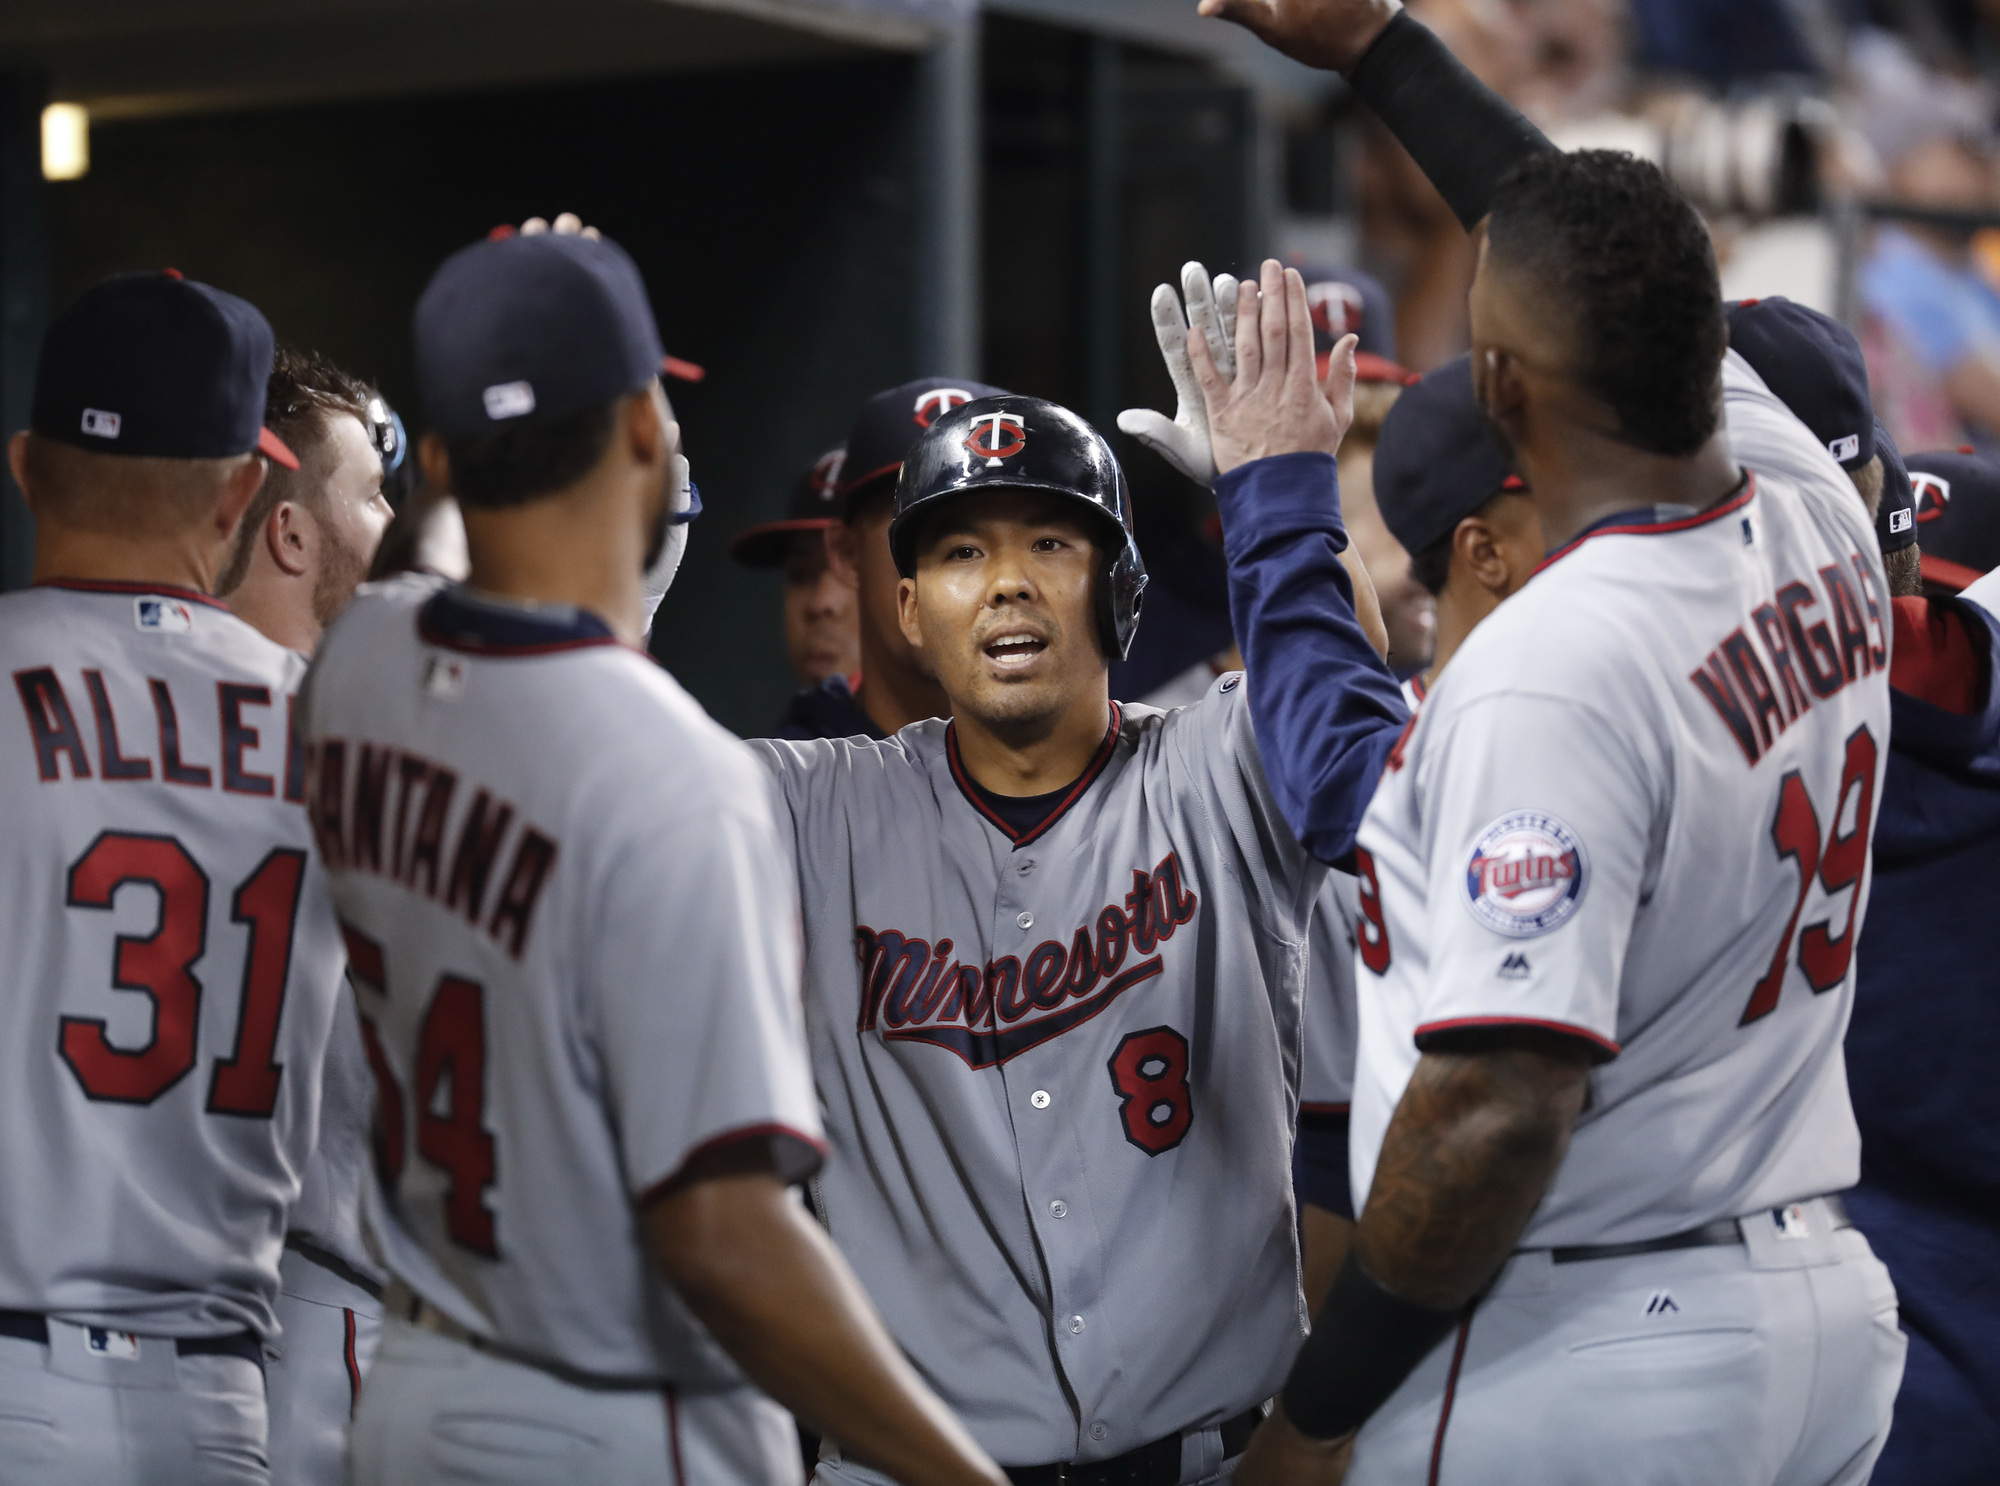 After three seasons with Twins, Kurt Suzuki expects he's moving on